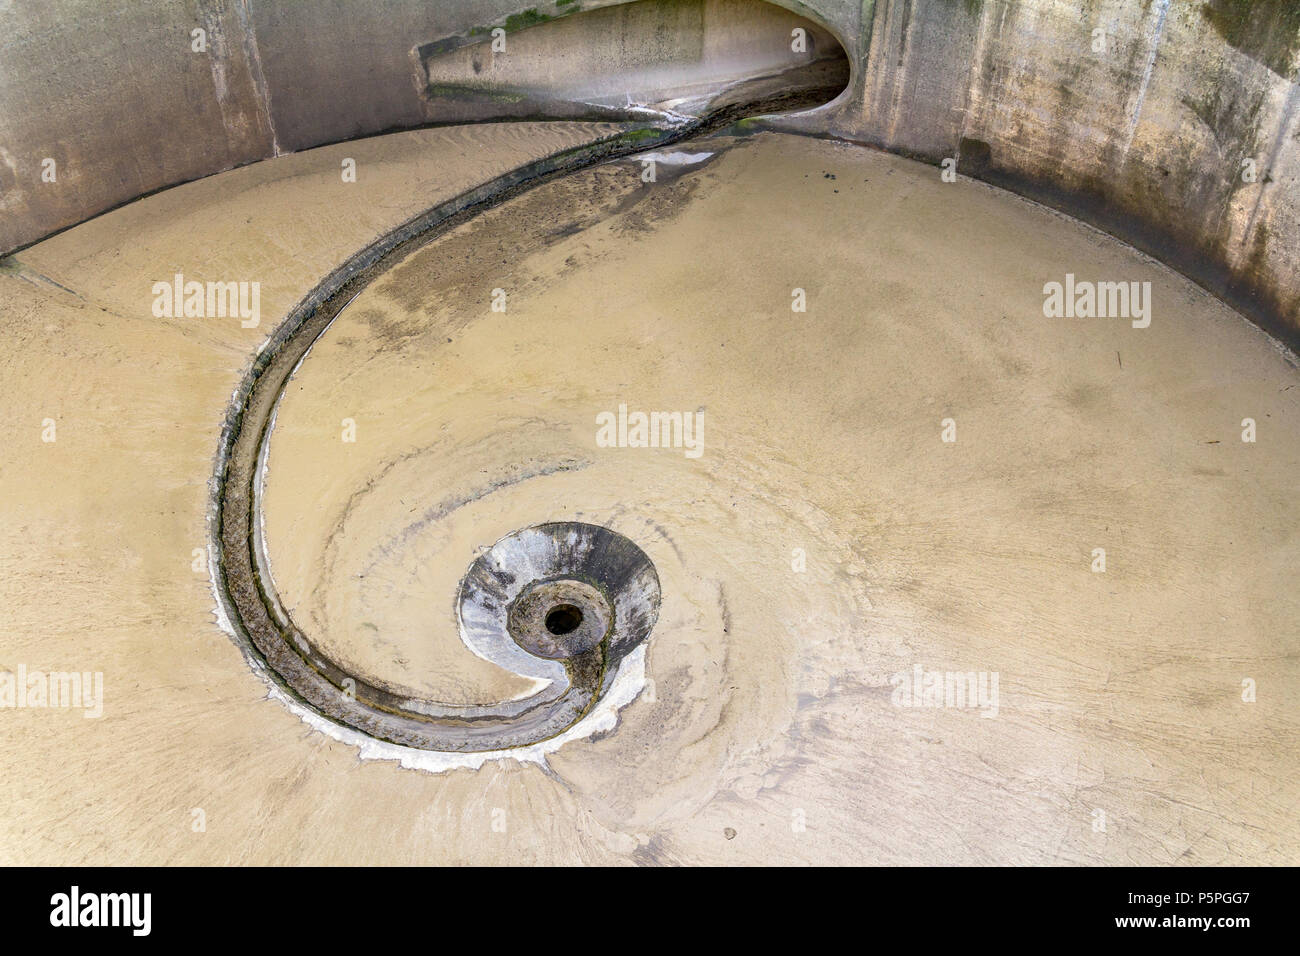 nearly abstract full frame detail showing the ground of a sedimentation tank Stock Photo